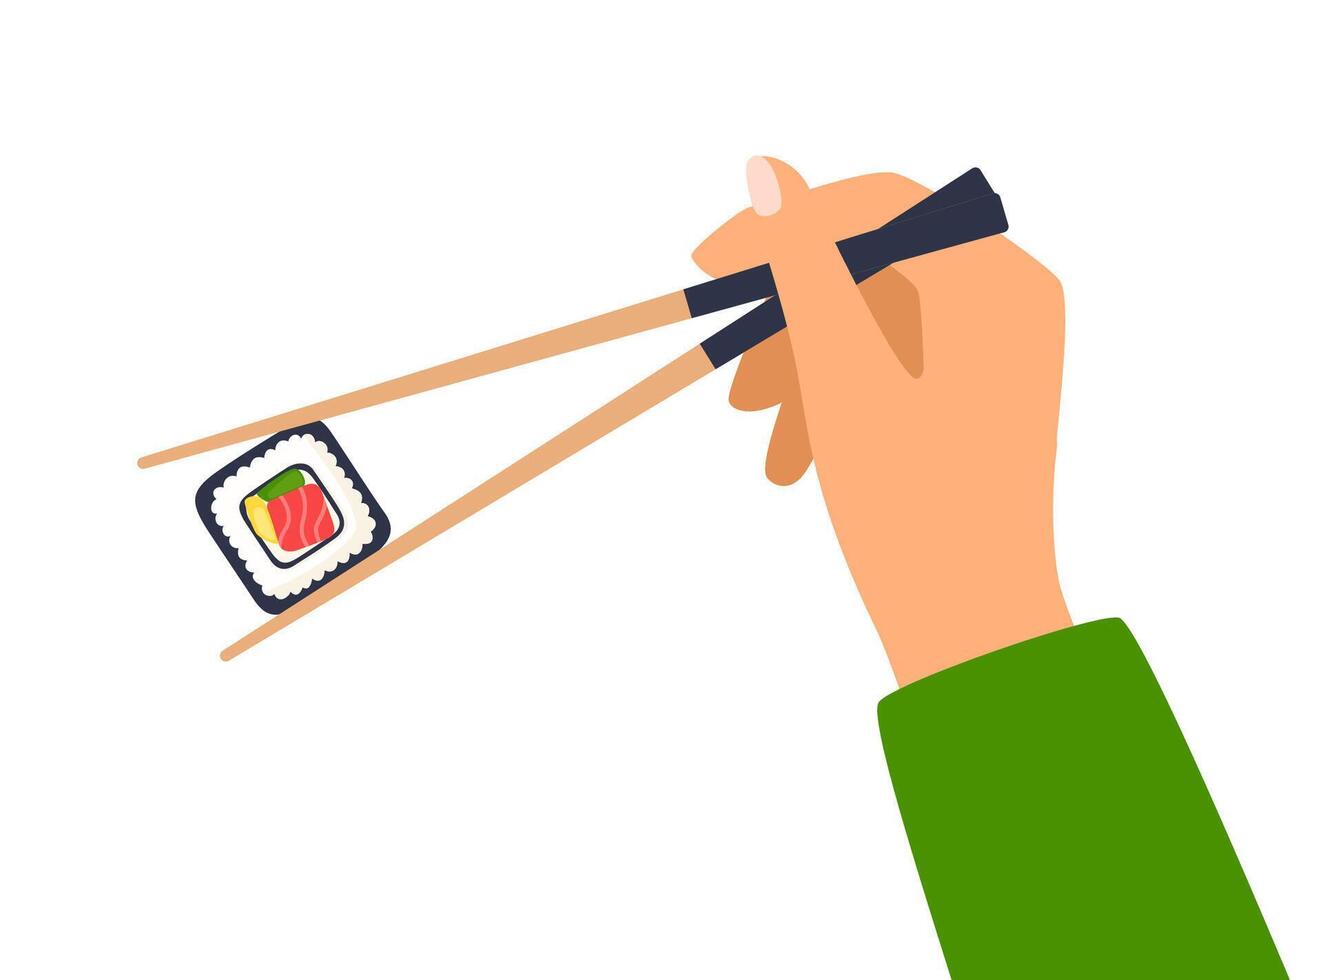 Hand holds chopsticks with sushi. Hand holds bamboo sticks. Asian cuisine. Image showing how to use chopsticks. Vector illustration.